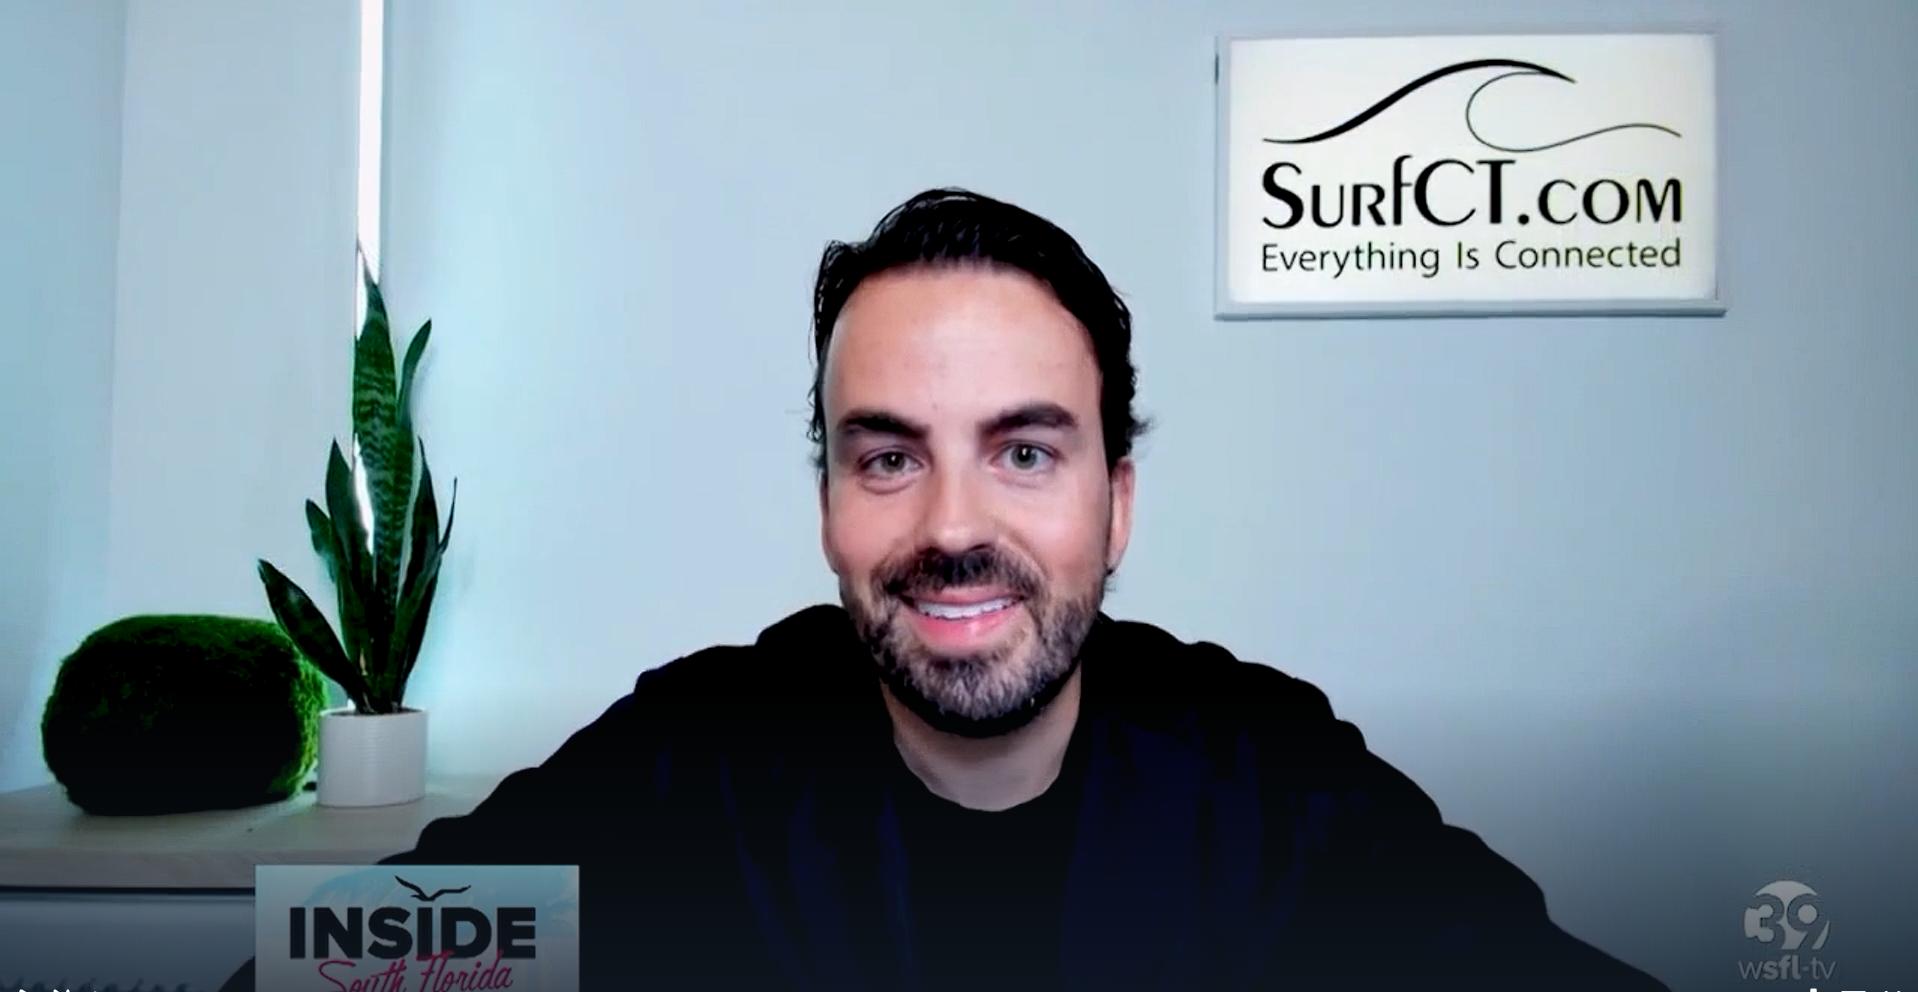 Paul Vigario: CEO & Founder of SurfCT